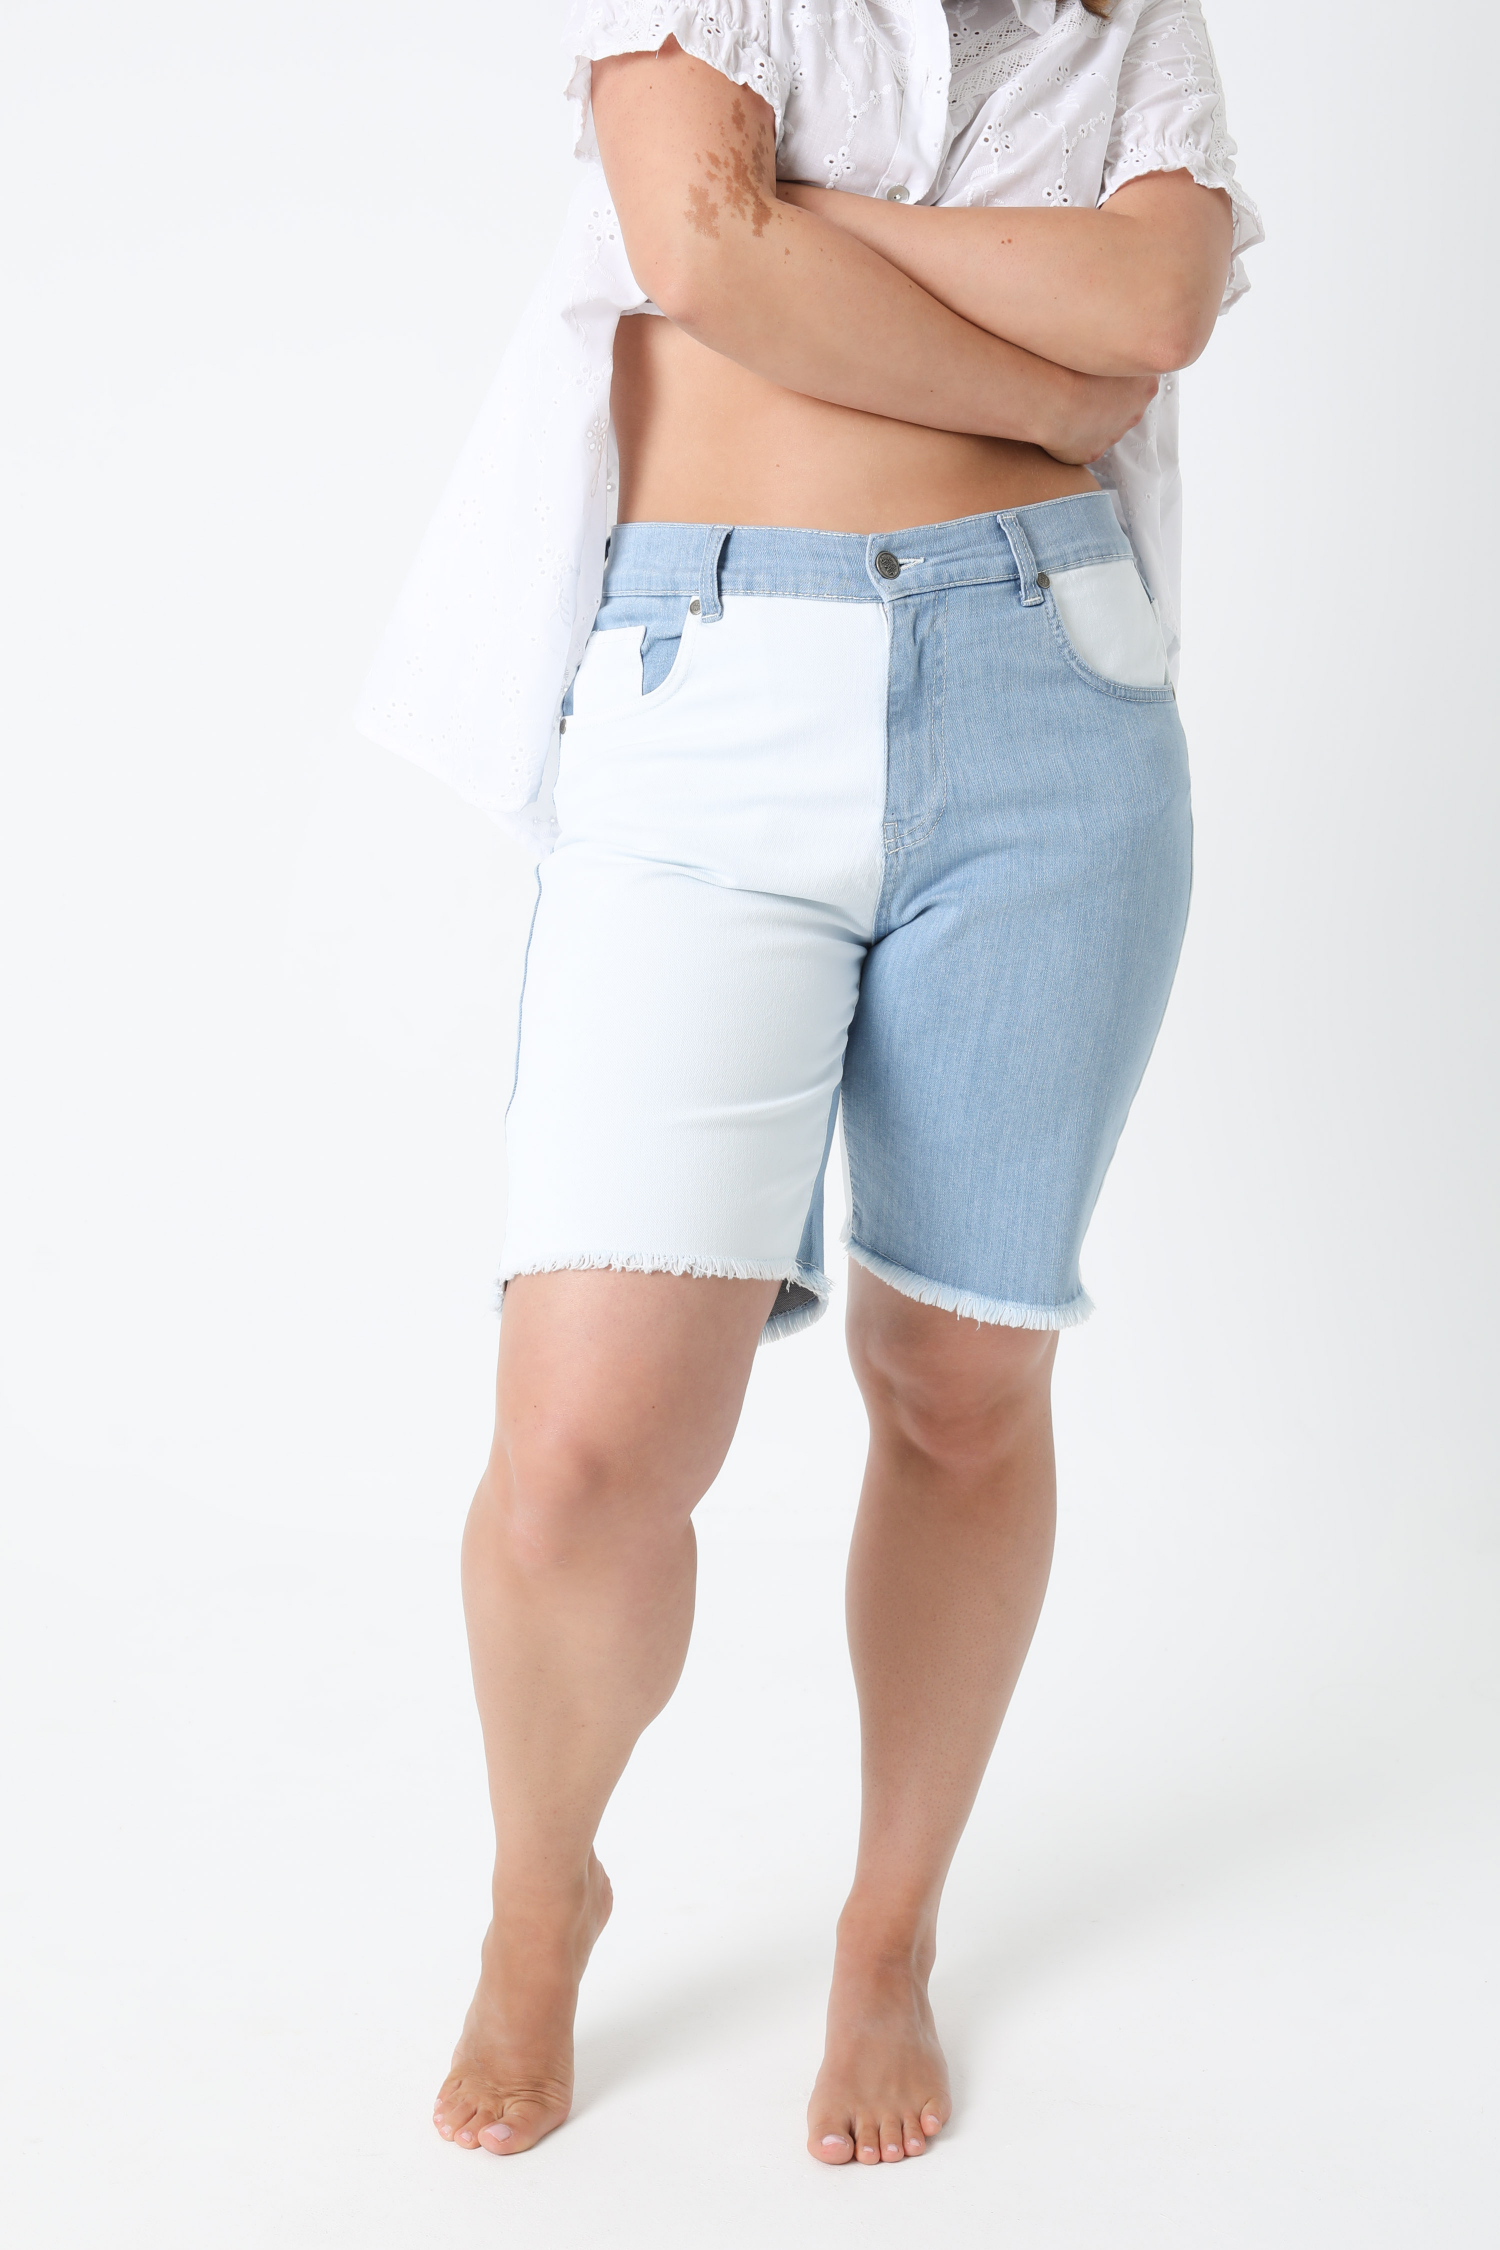 Bermuda shorts in two-tone jeans